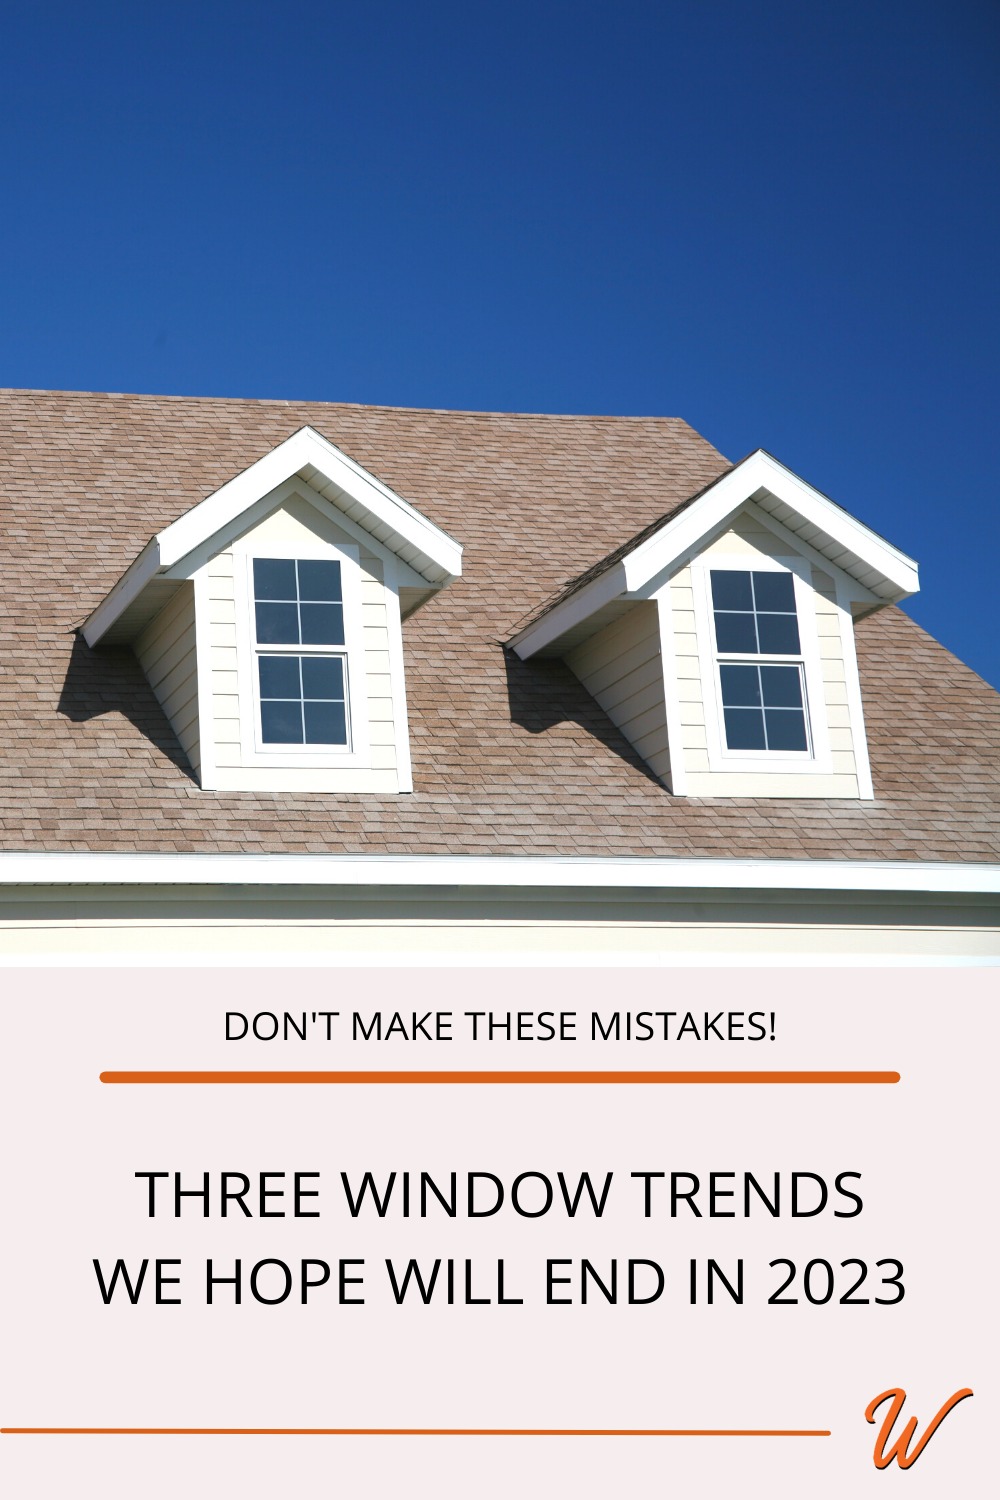 Image of a roof with two dormer windows captioned with "Don't make these mistakes: Three window trends we hope will end in 2023"